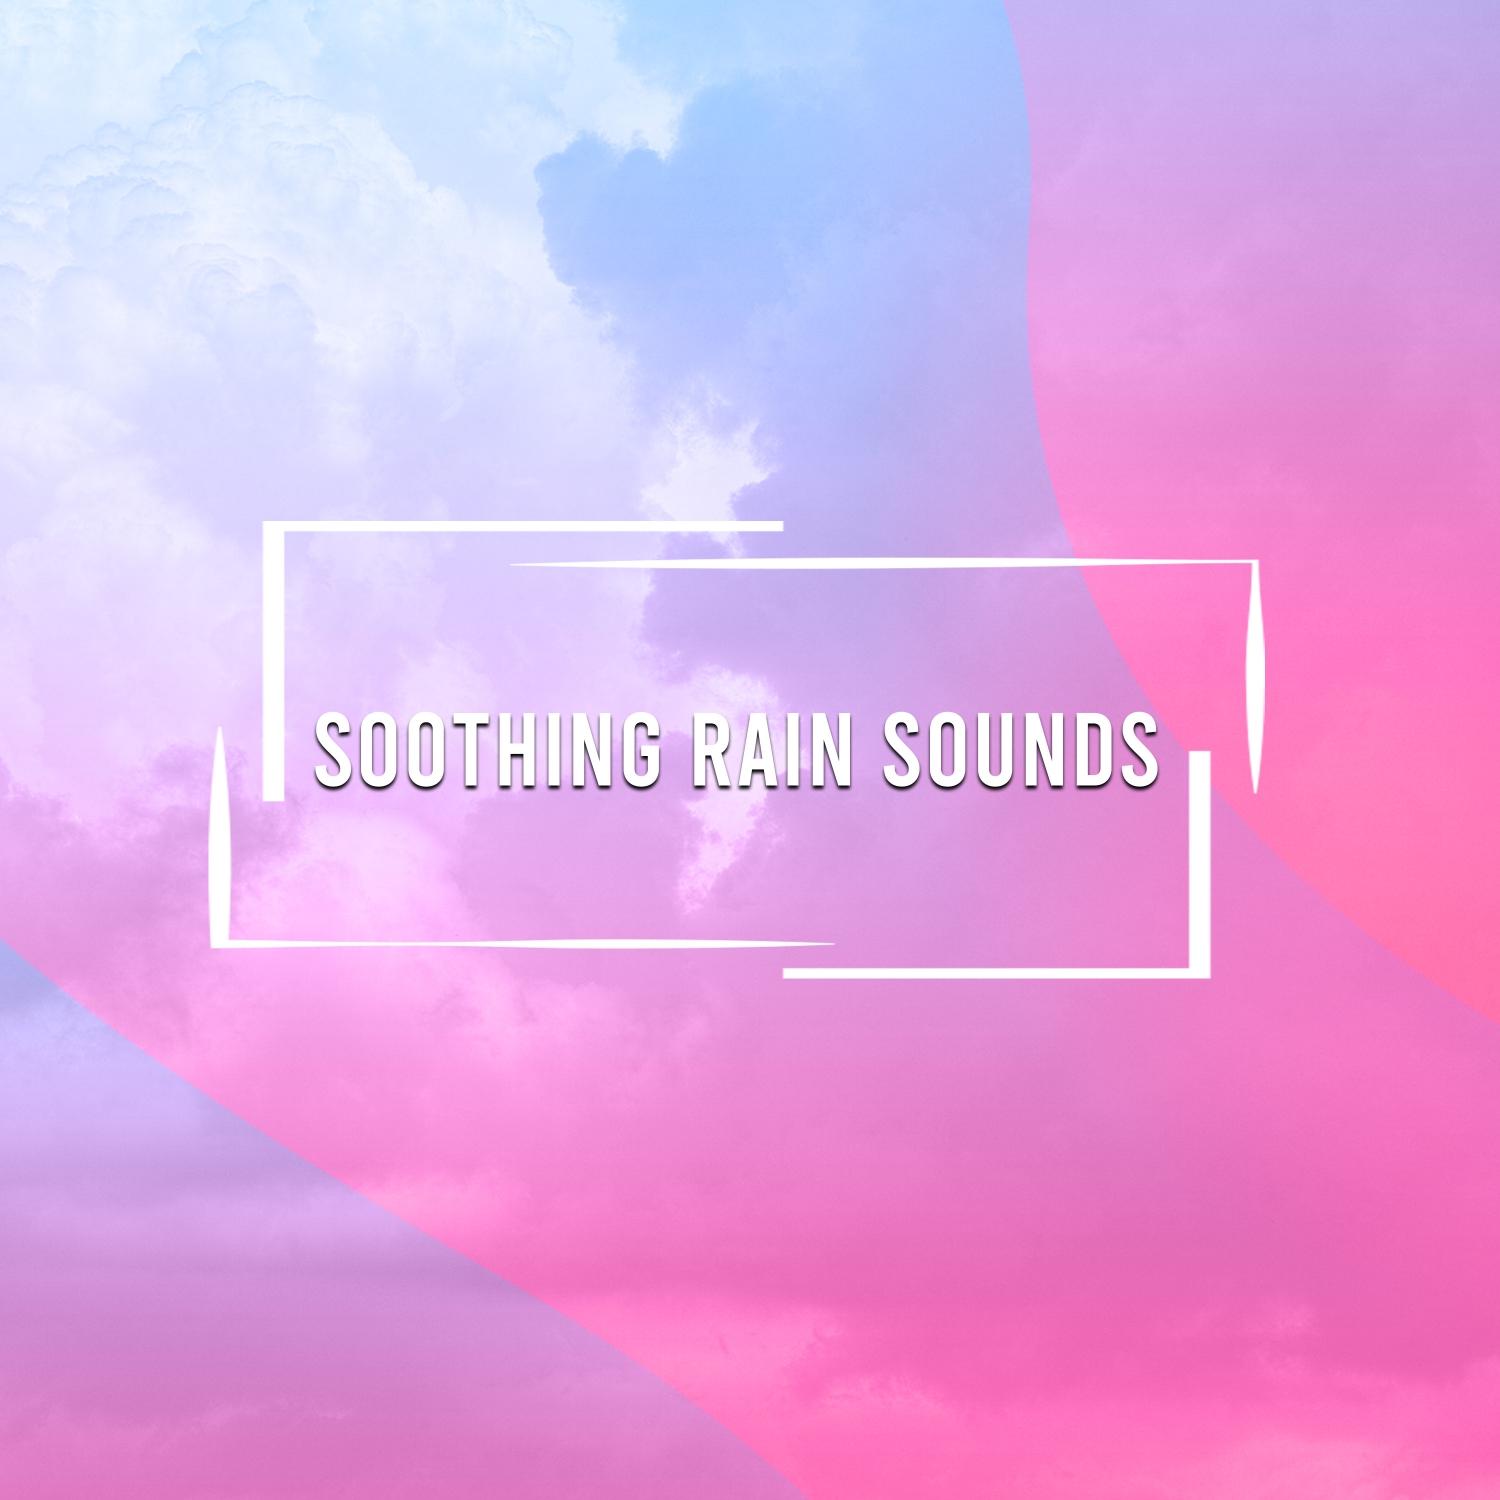 1 Hour Natural Rain Sounds - Loopable for Sleep, Spa, Relaxation, Yoga or Study